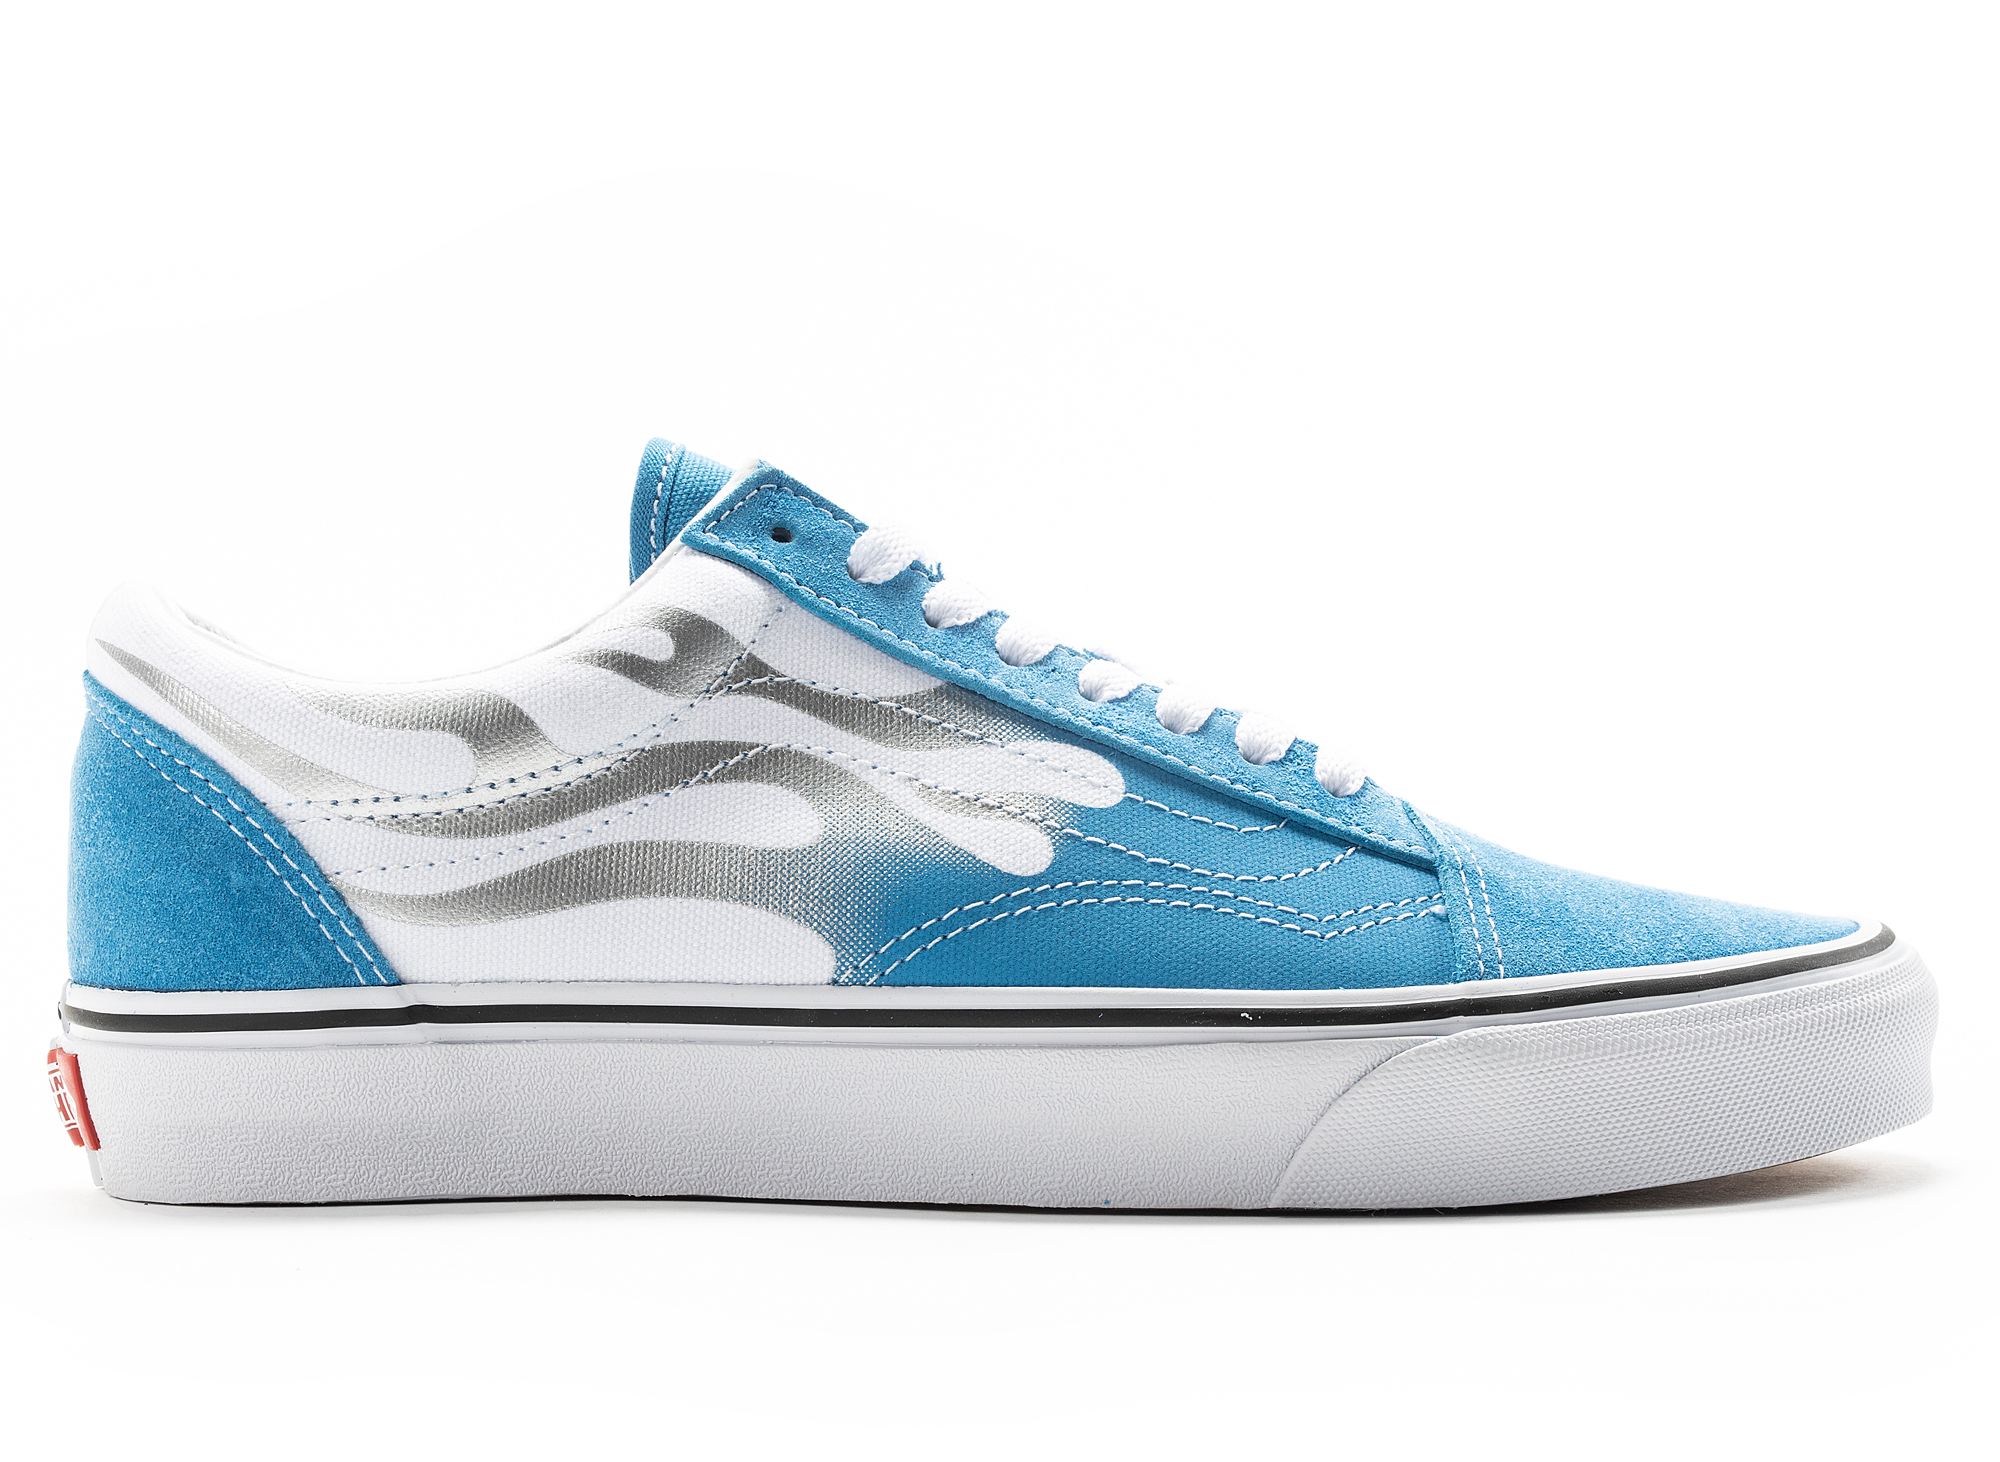 vans with blue flames